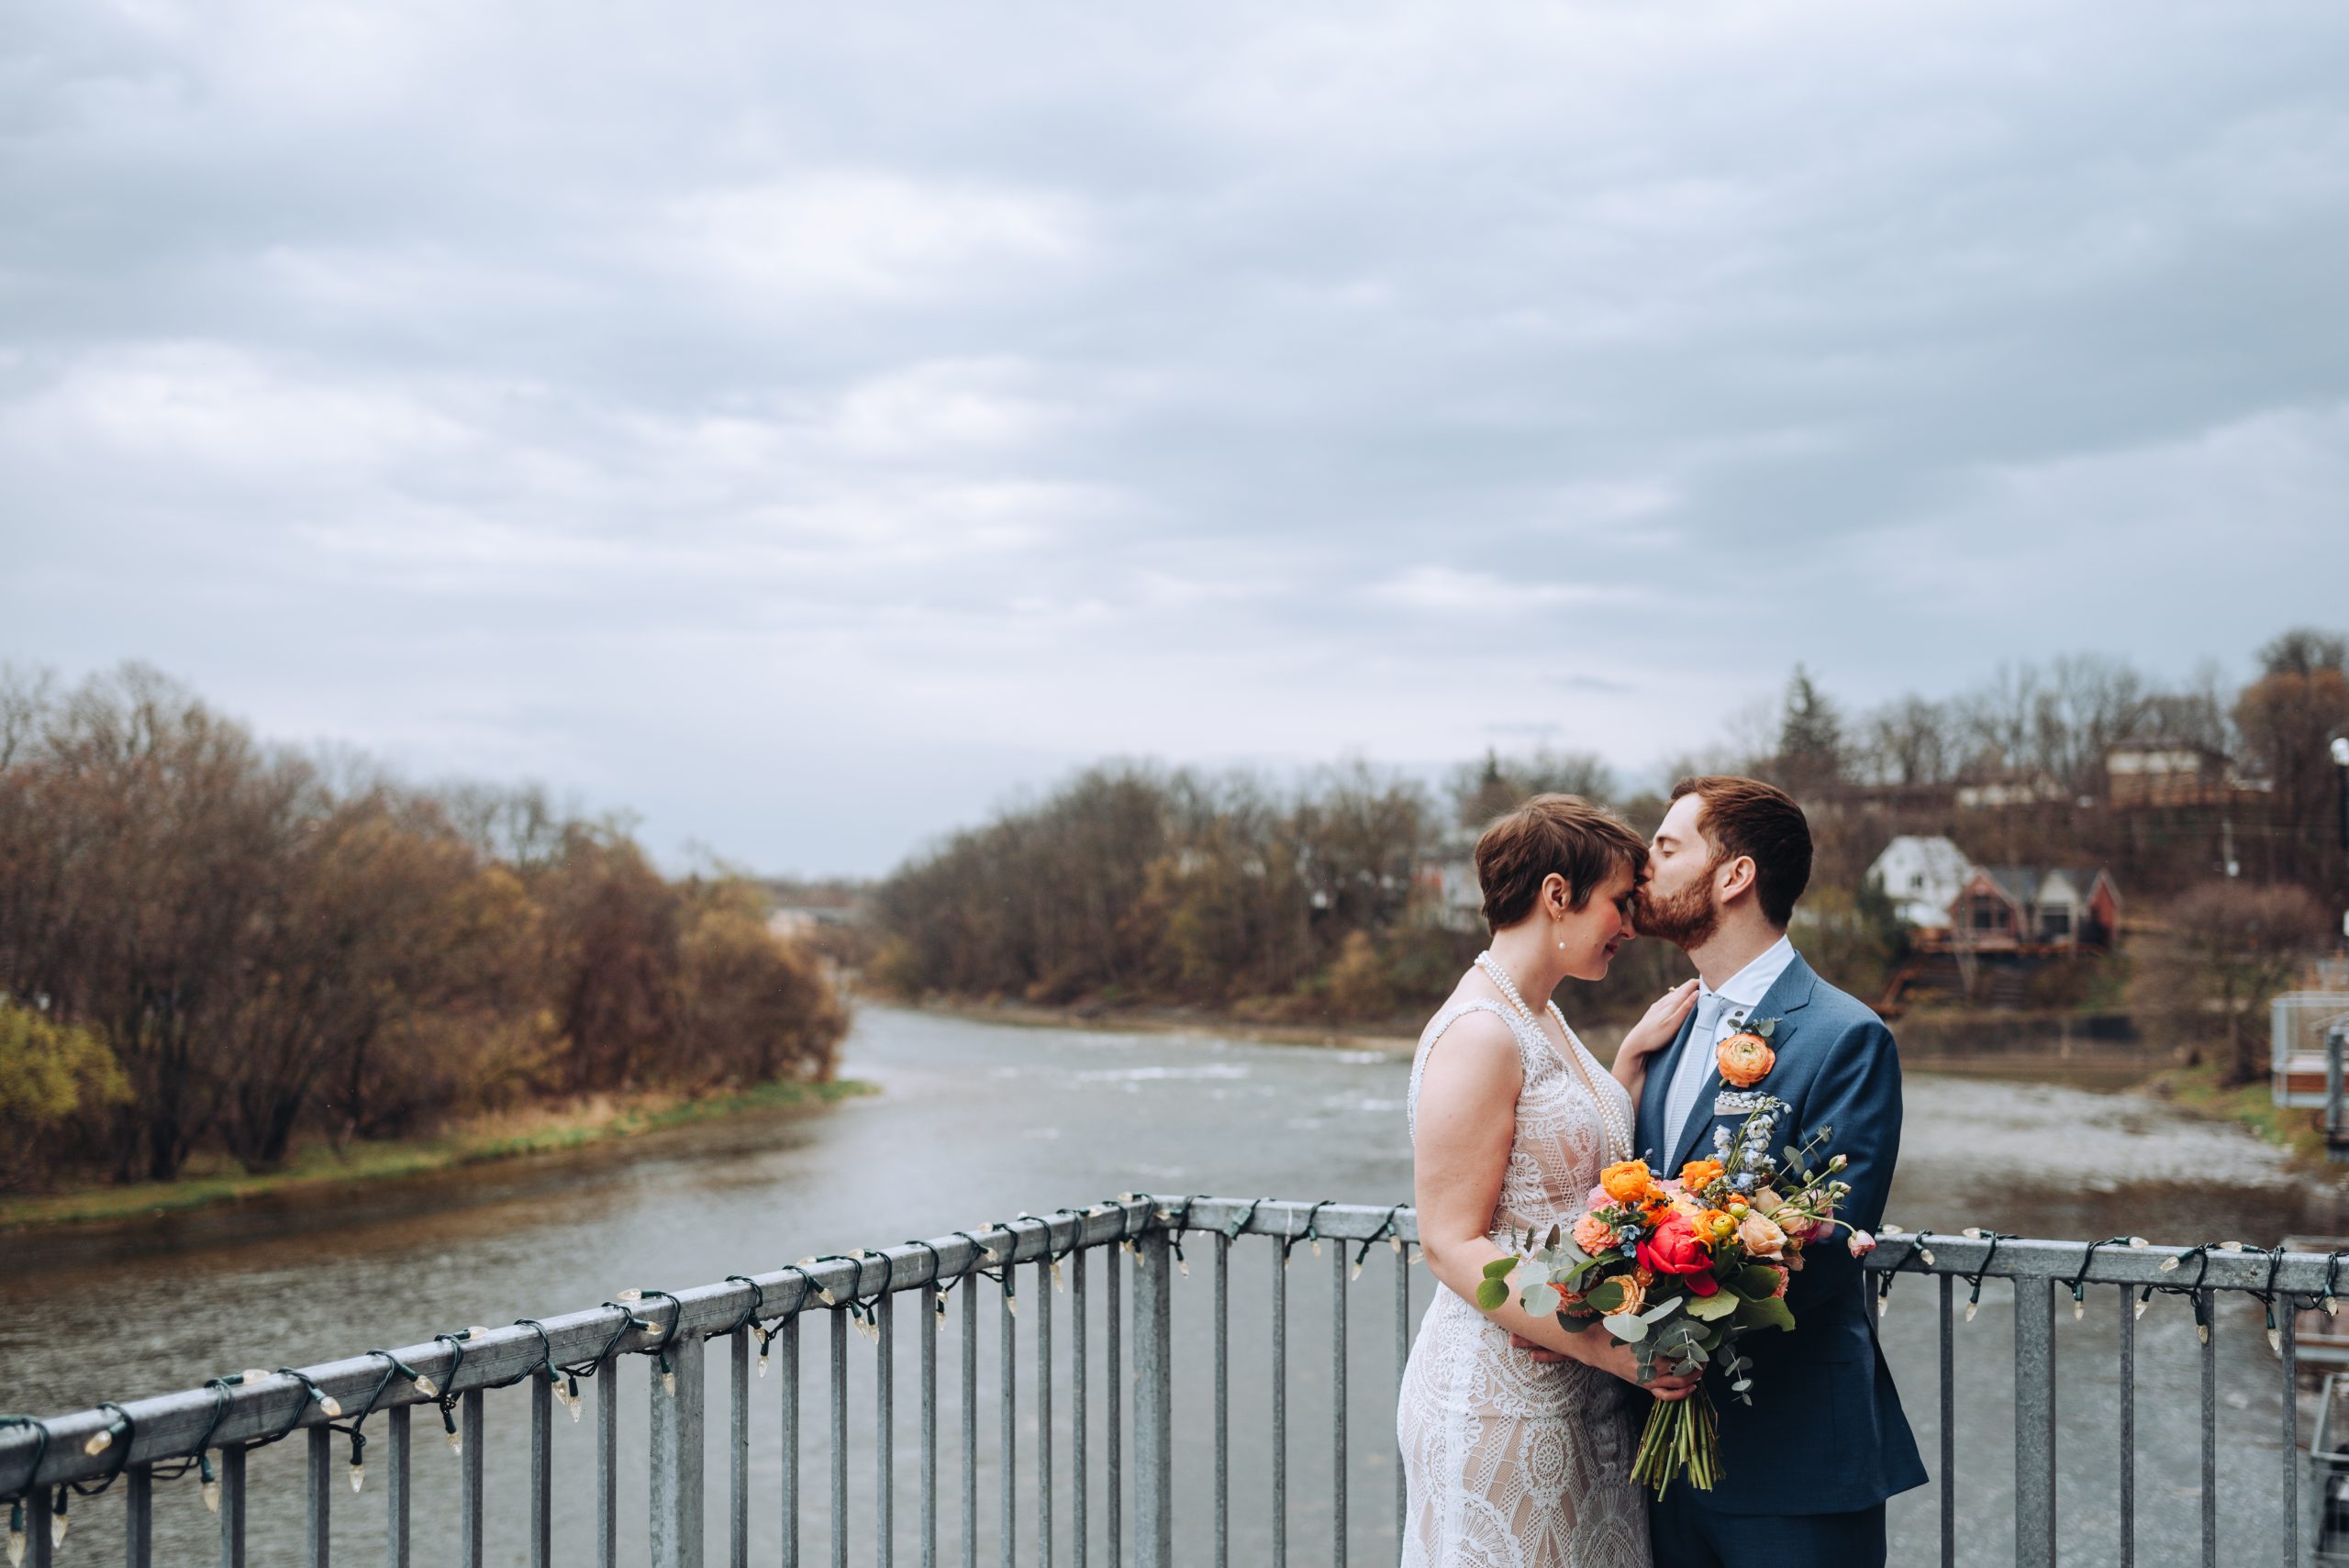 The Wedding Ring, Now & Always Special Event Decor, Paris Ontario, Devon C Photography, Kitchener Waterloo Ontario Wedding Photographer, Groom kissing Bride's forehead on balcony overlooking the water